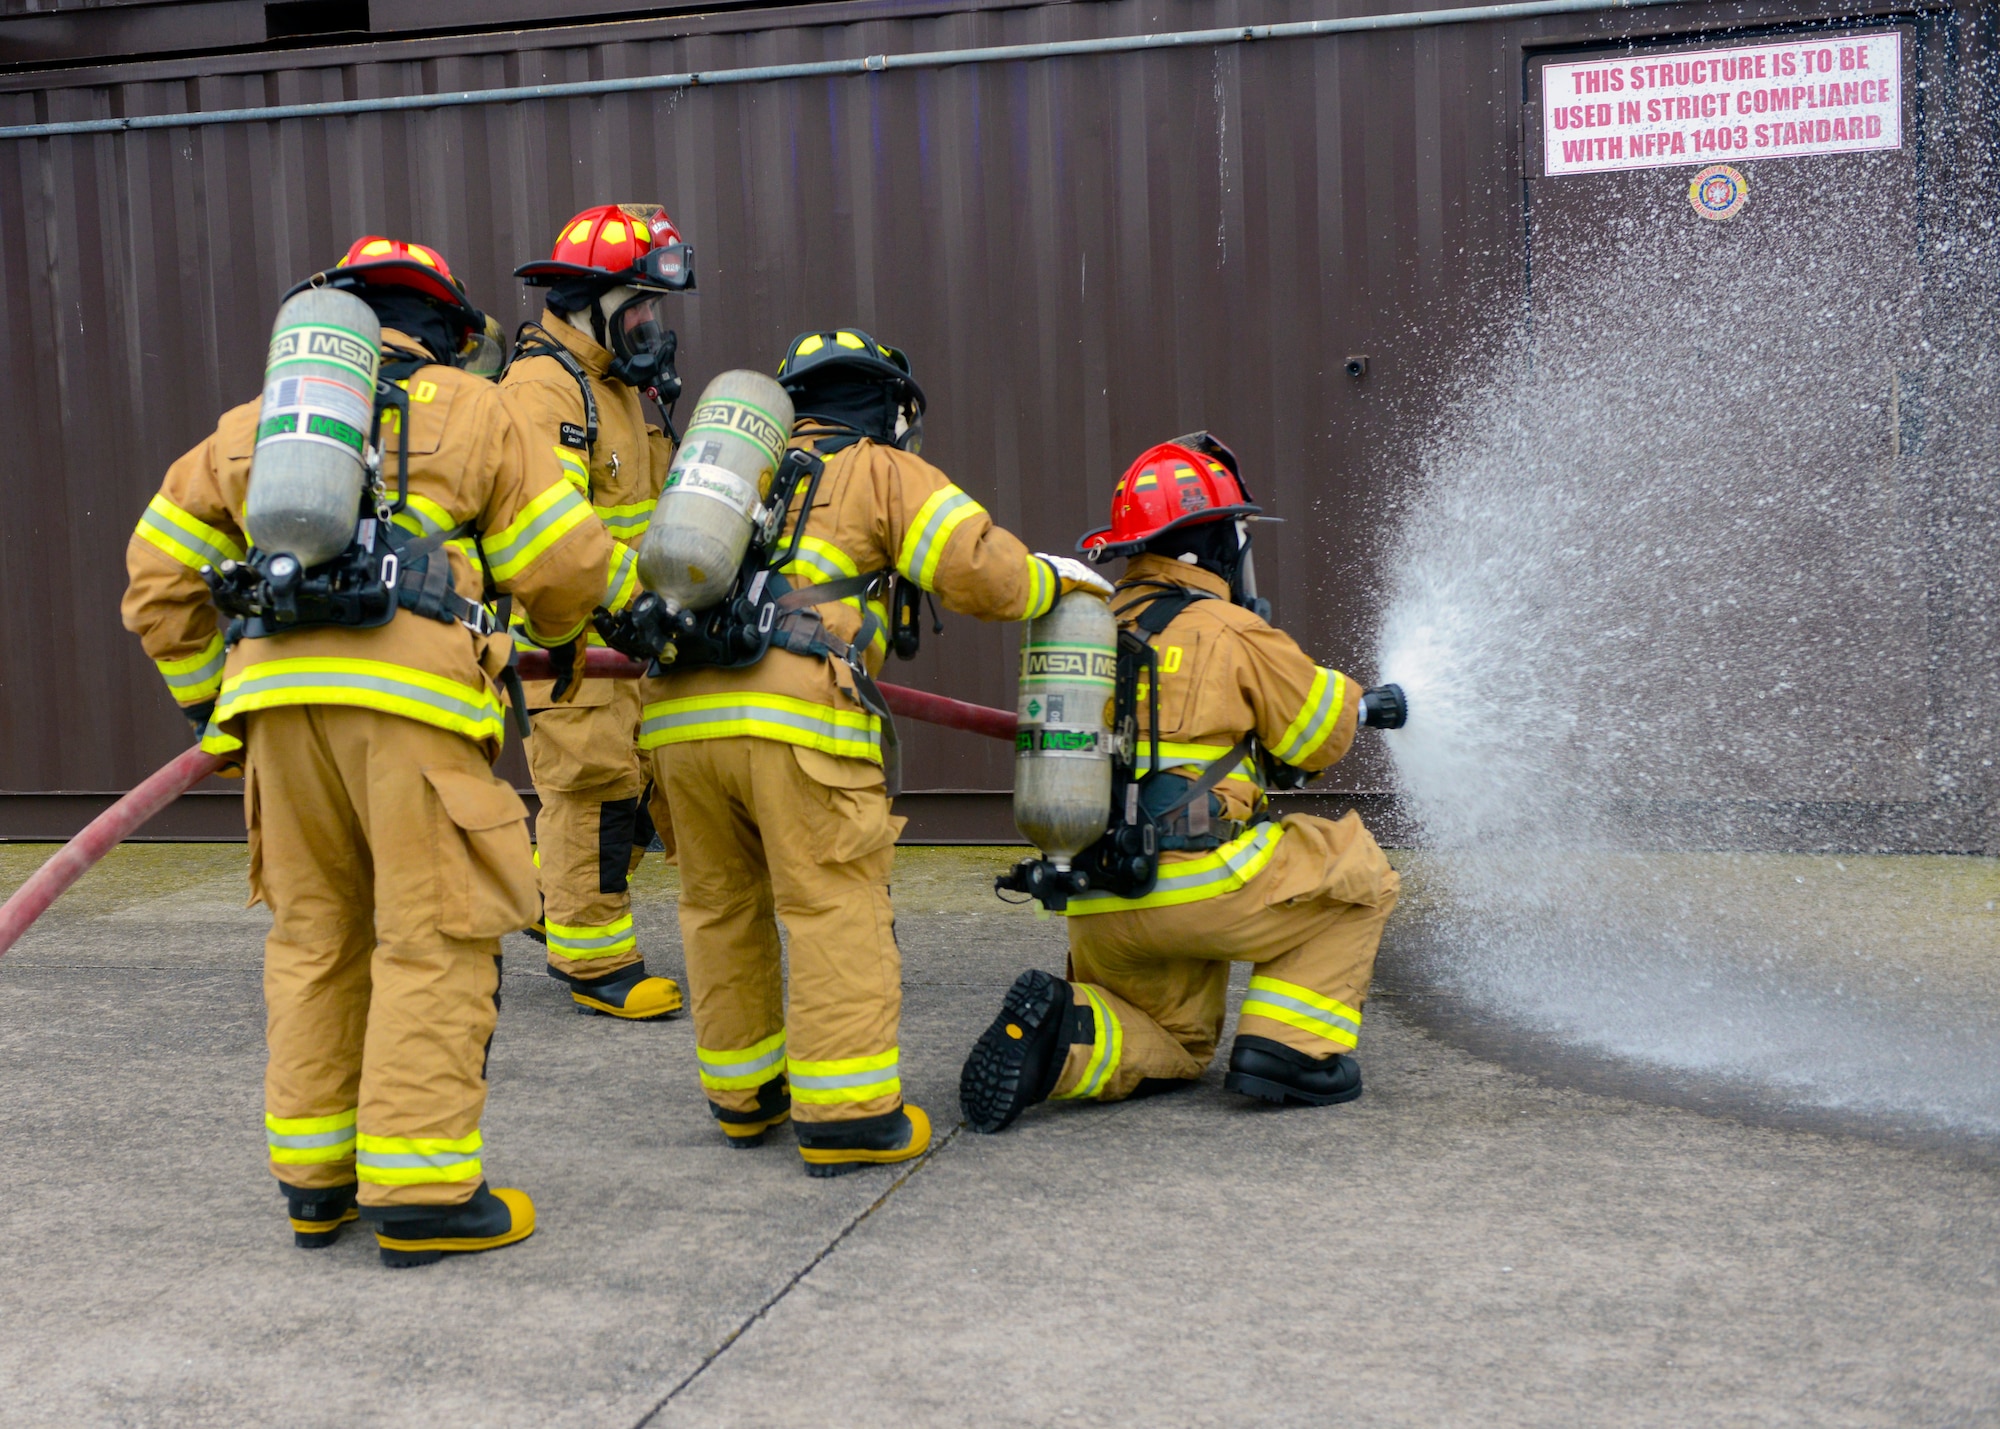 Firefighters from the 65th Civil Engineer Squadron tests a fire hose before combatting a structural fire at their training facility on Lajes Field, Azores, Feb. 6, 2016. The training was designed to prepare newly hired Portuguese locals. Lajes Field, operated by the 65th Air Base Group, became a geographically separated unit of the 86th Airlift Wing in August, 2015. (U.S. Air Force photo/Tech. Sgt. Kristopher Levasseur)